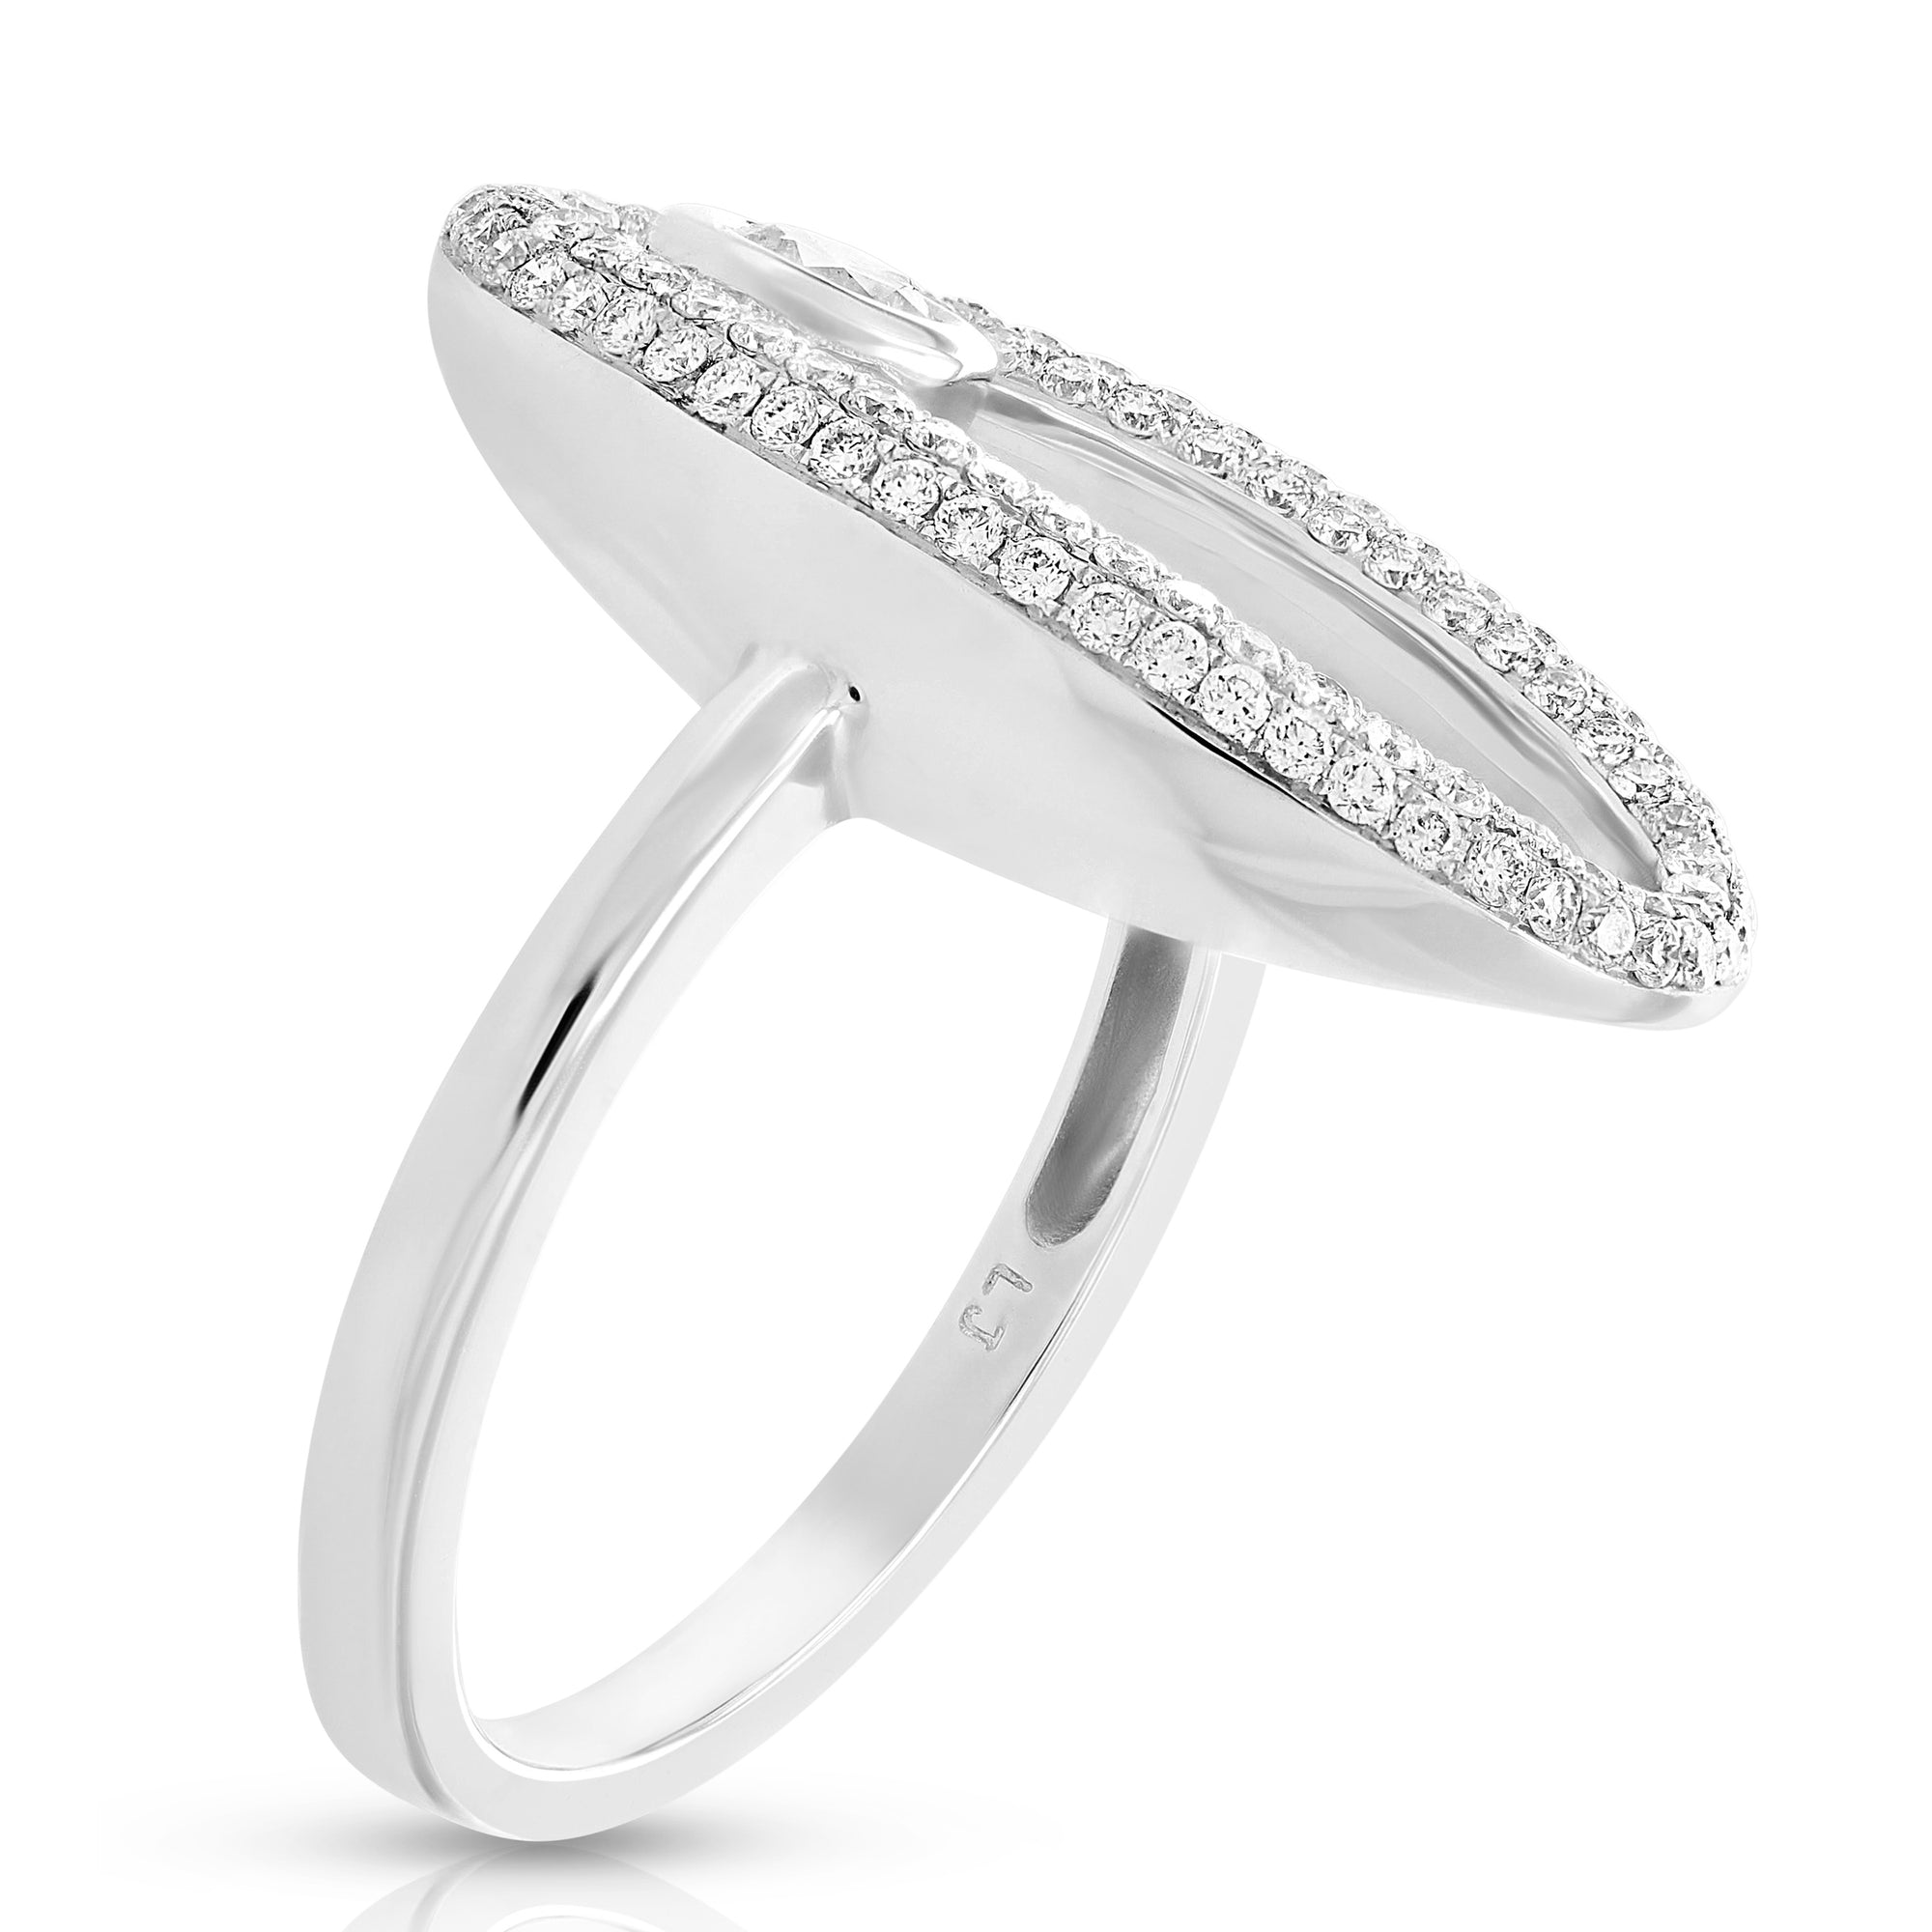 0.90 cttw SI1-SI2 18K White Gold Diamond Oval Ring Engagement Bridal Size 7